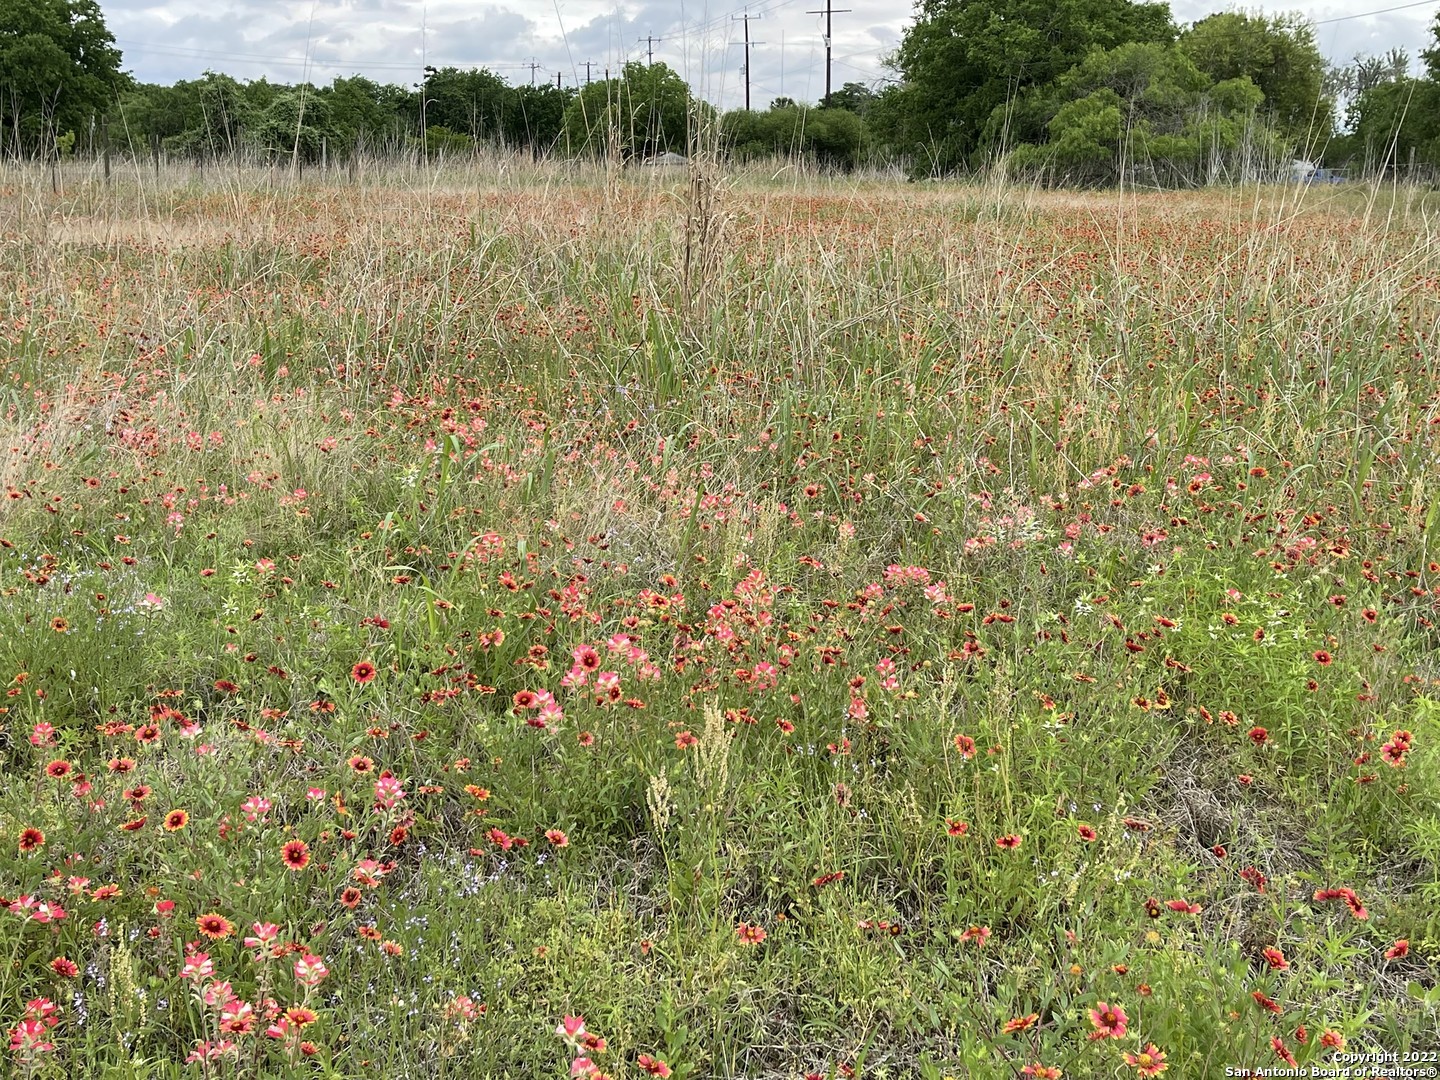 Over 80 acres of unrestricted property in San Antonio with access to Pleasanton Rd! Development opportunity, own your own ranch! Property was never surveyed but has metes and bounds, potential buyer to verify acreage. Additional acreage is available.